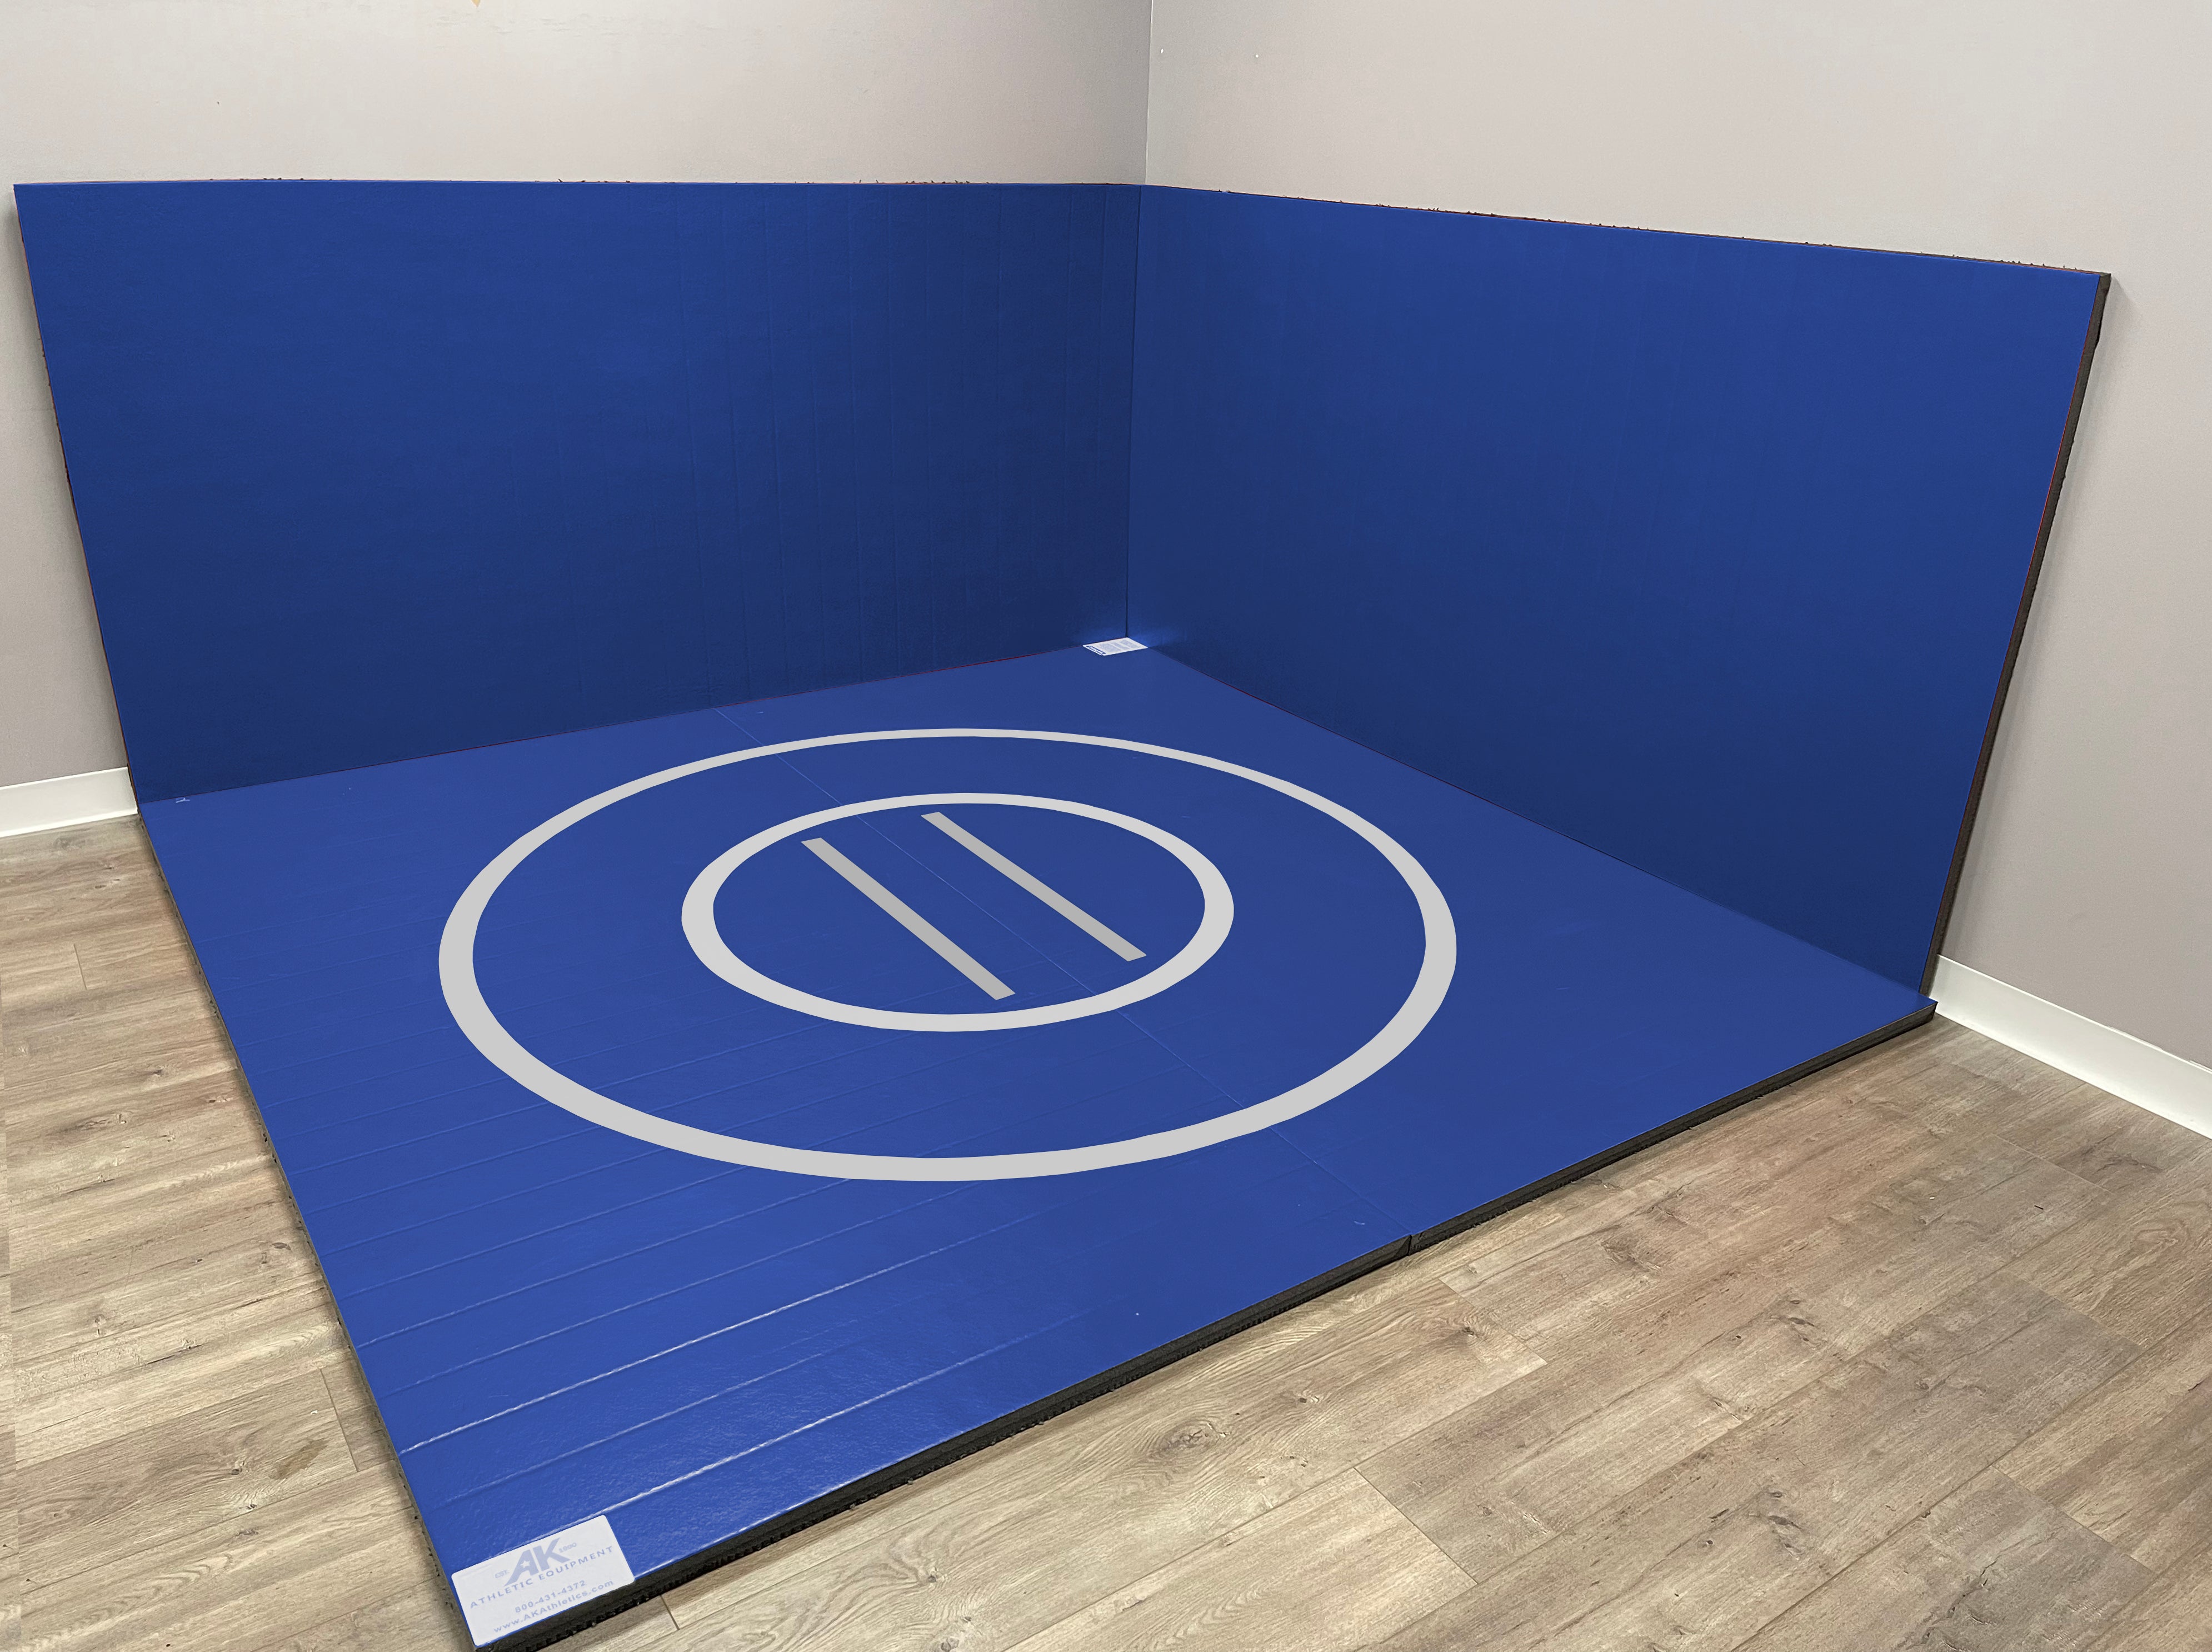 Instant Wrestling Room 10' x 10' wrestling mat and Removable Roll Up Wall Pads Package